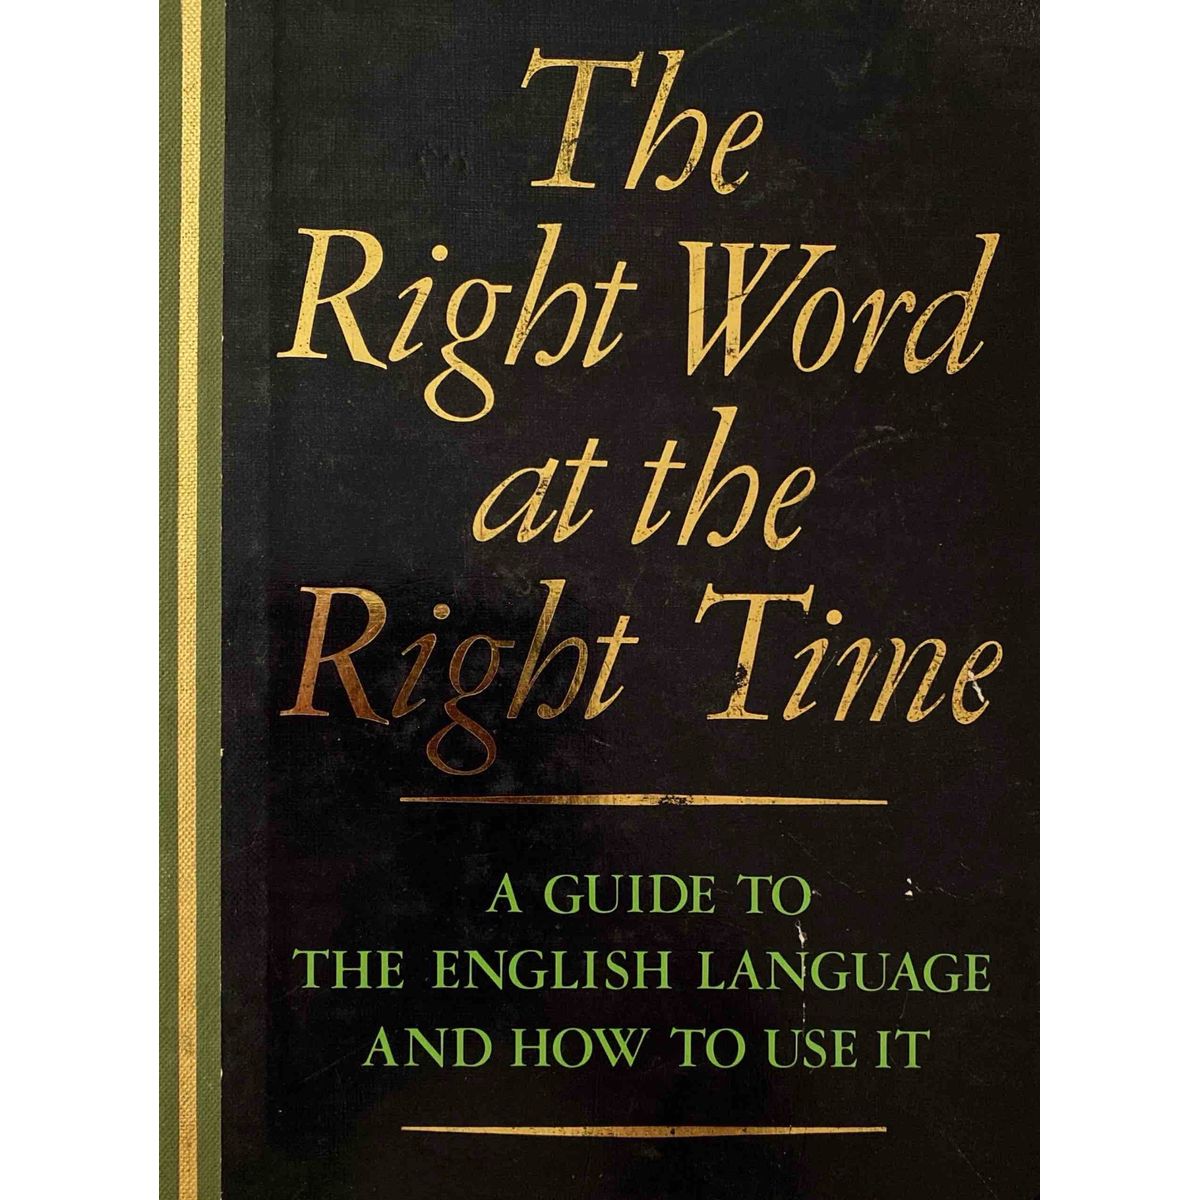 The Right Word at the Right Time: A Guide to the English Language and How to Use It, edited by J.E. Kahn [1985]